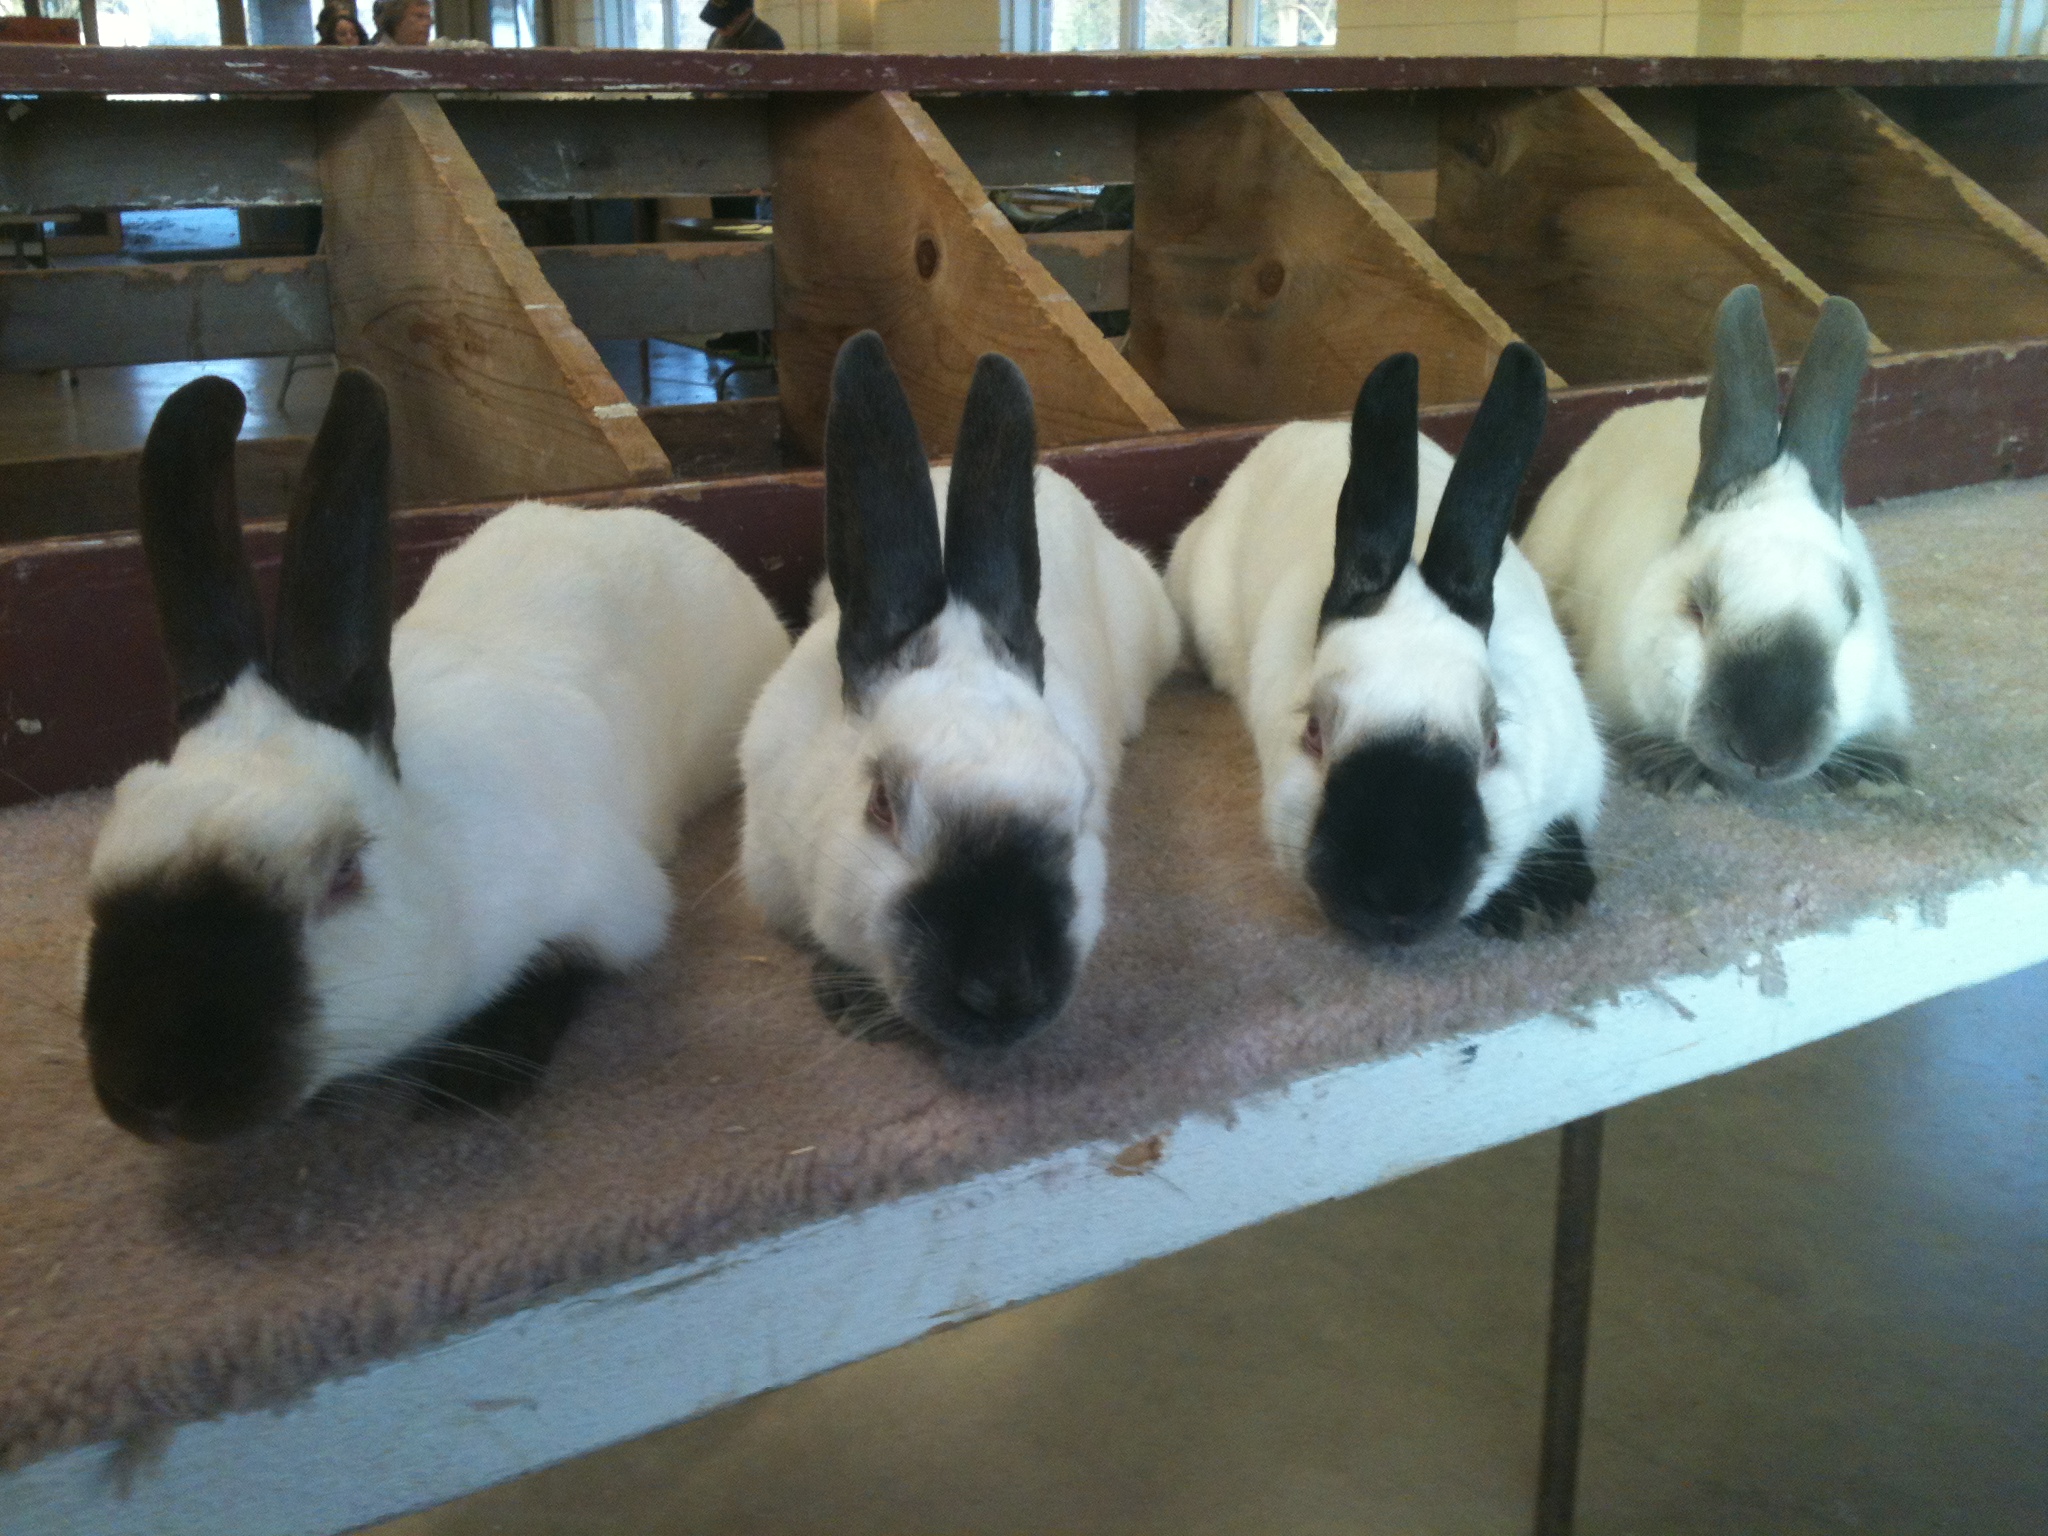 Four color varieties of the Himilayan rabbit breed.